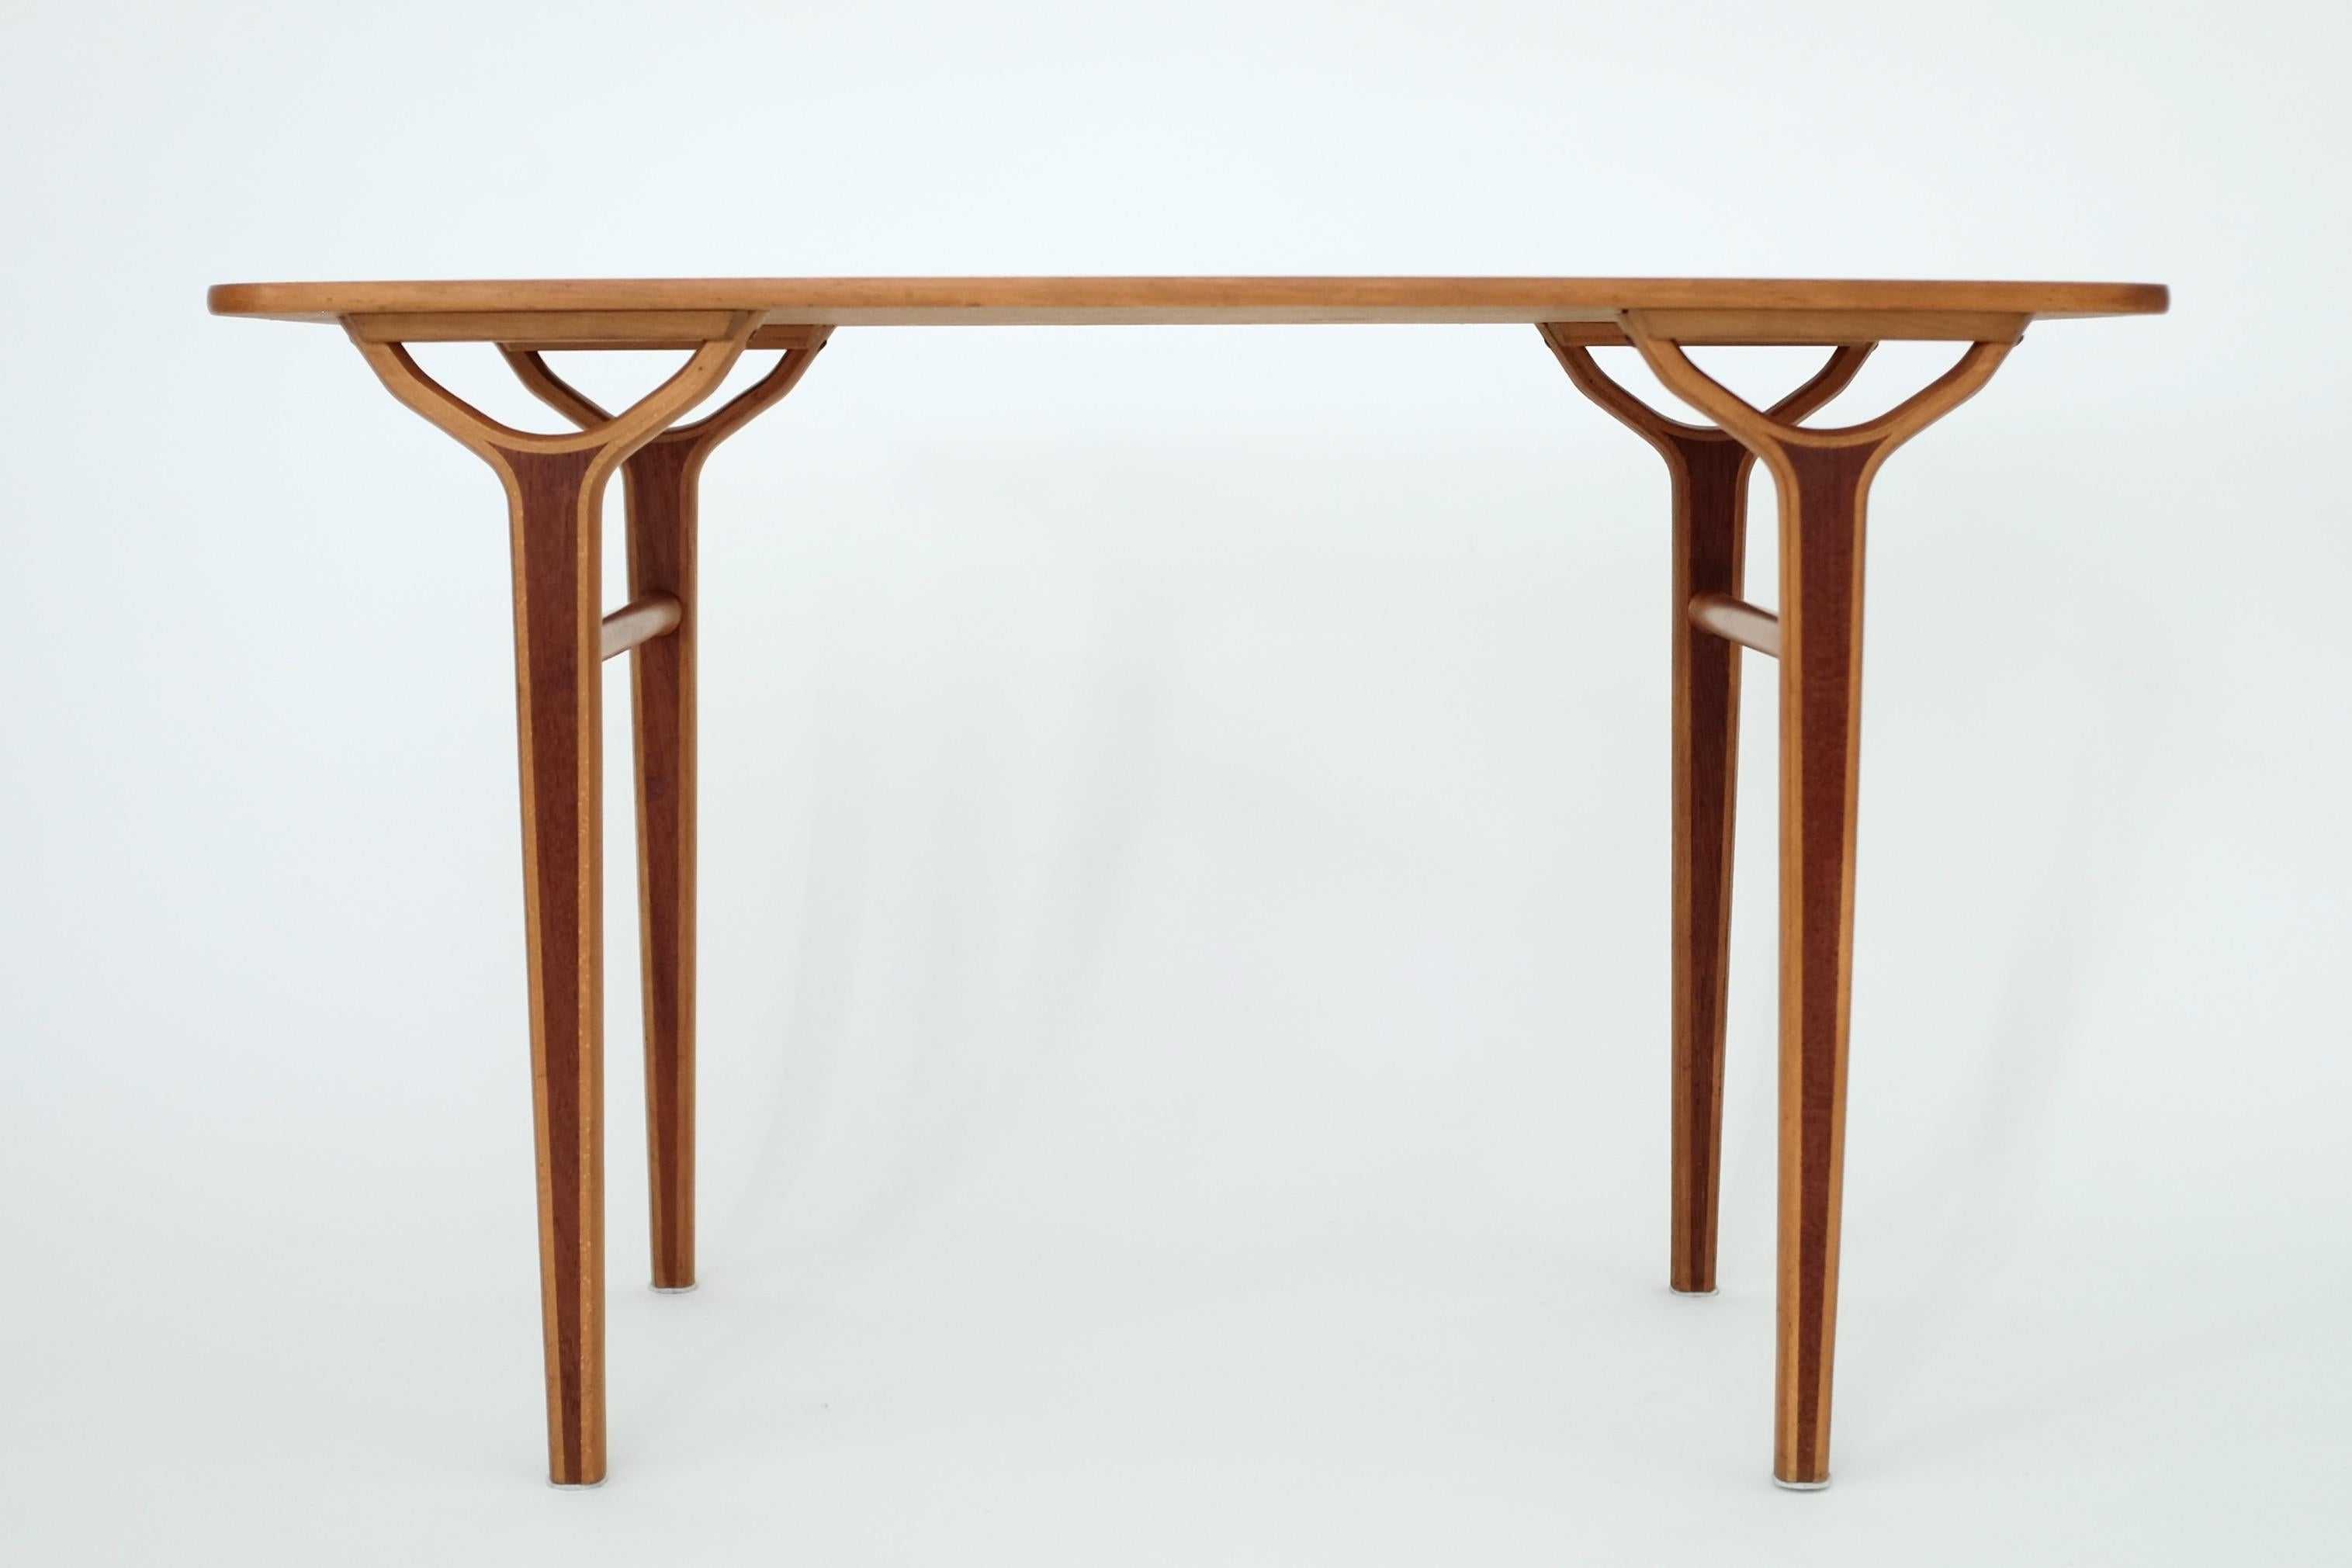 Beautiful and rare 1950's side table by Peter Hvidt & Orla Mølgaard-Nielsen for Fritz Hansen. It was part of the AX series designed by the two designers for FH and it contained tables and chairs. Inlays of teak on the legs creates a column like